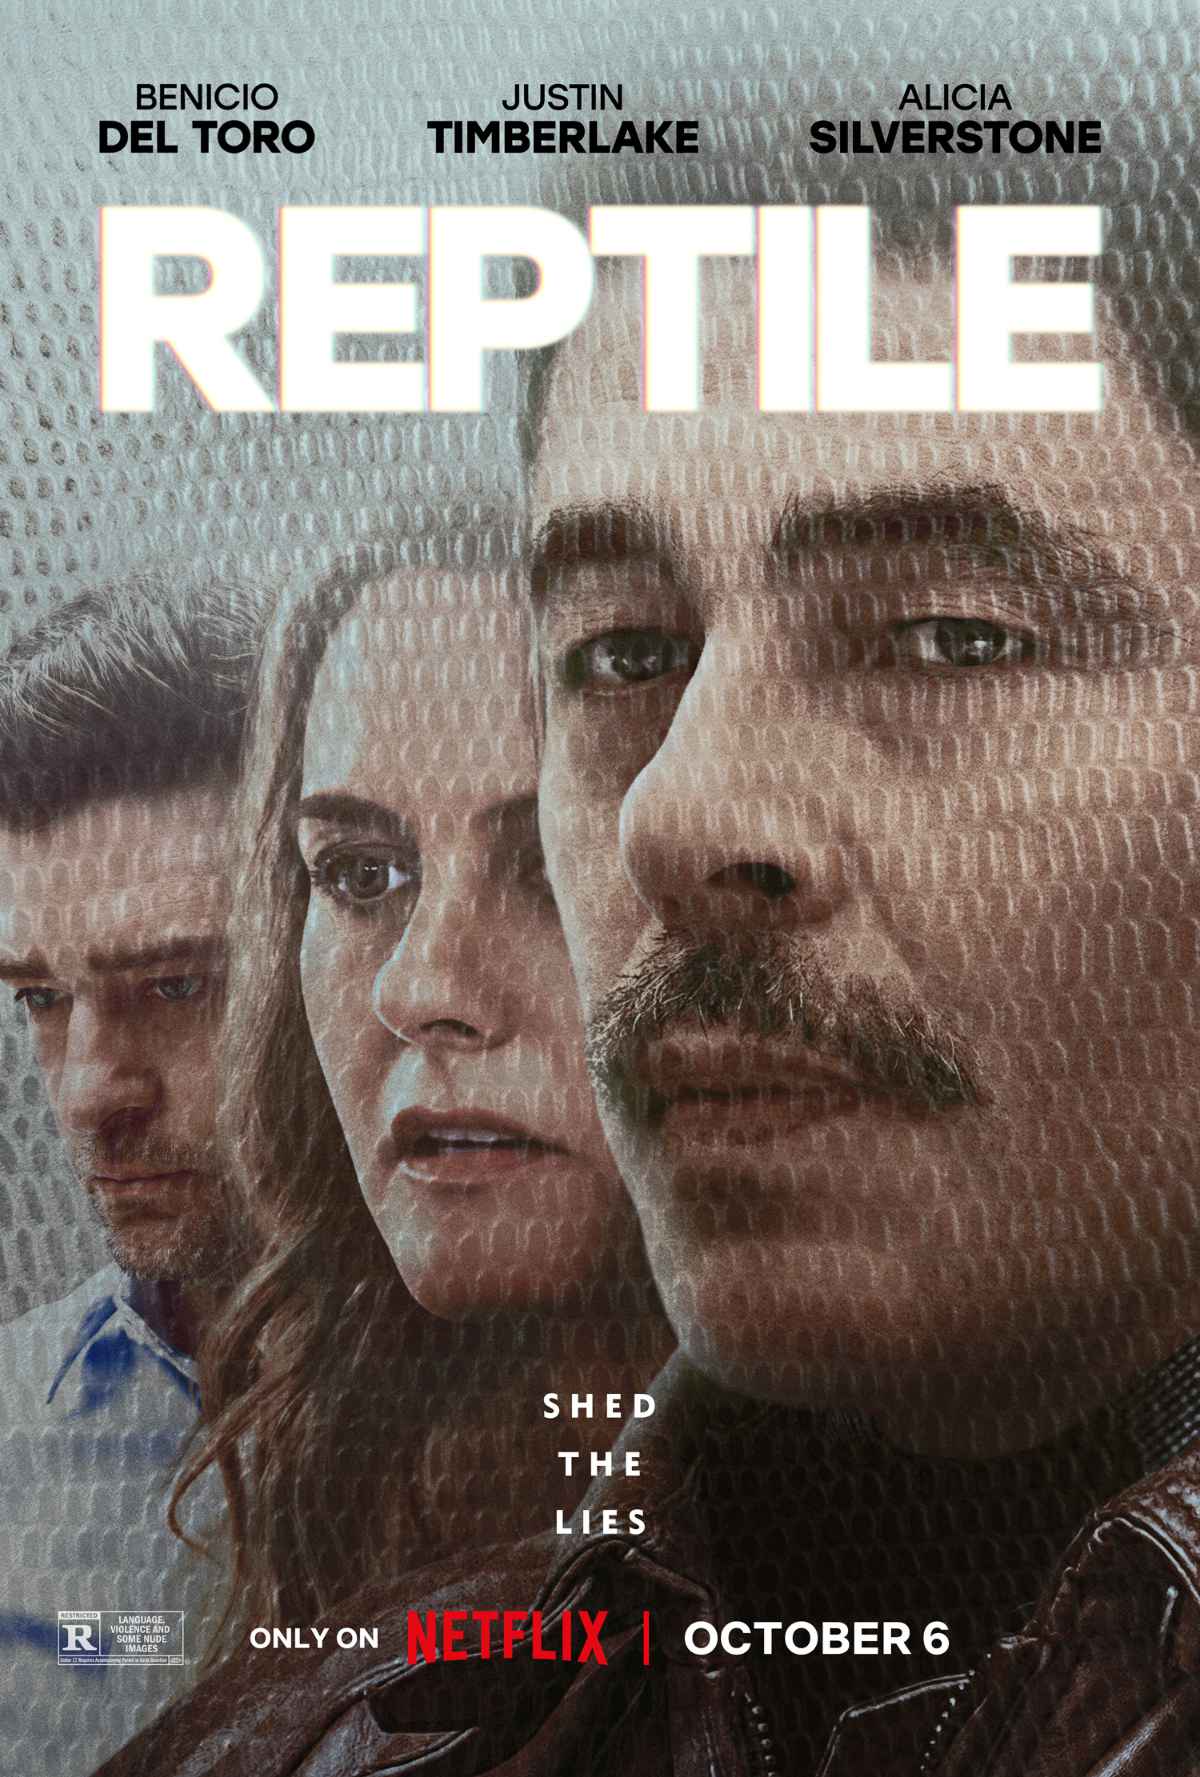 Reptile Trailer and Posters Revealed by Netflix